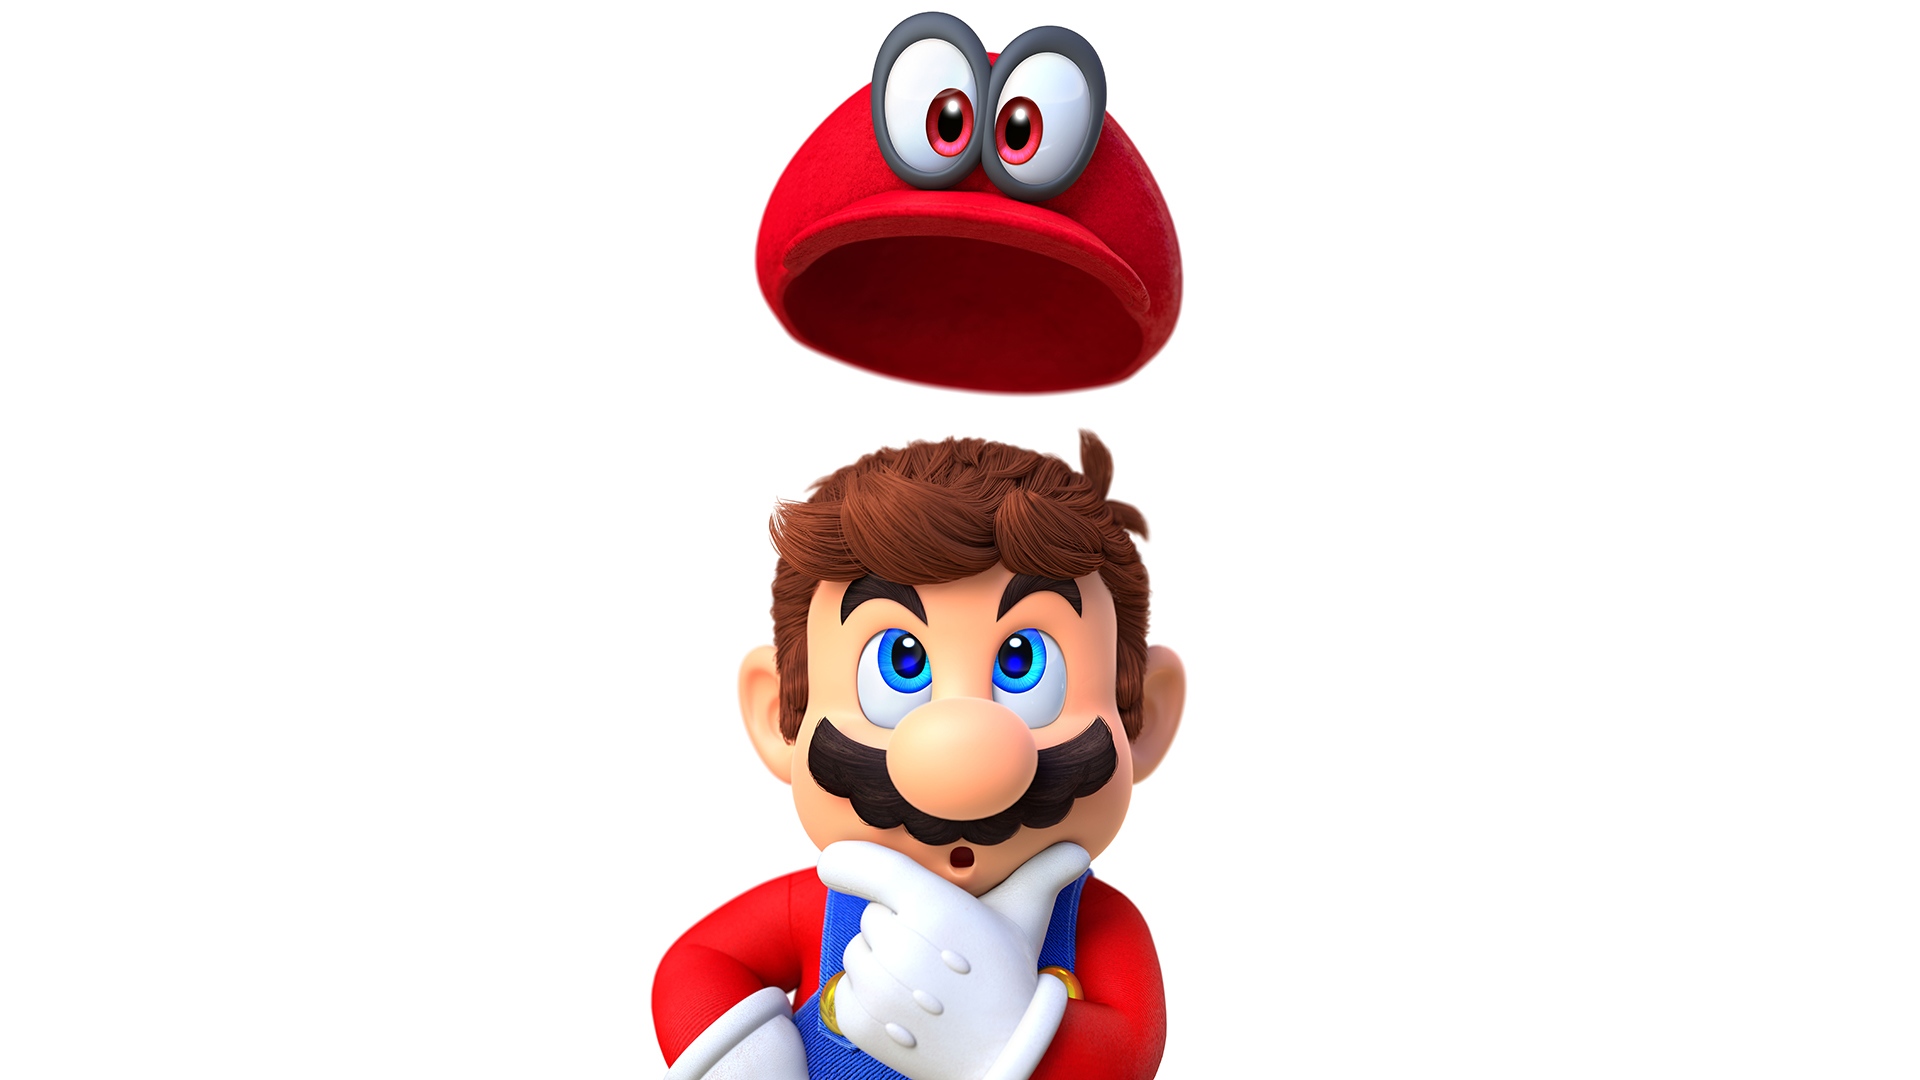 Super Mario Odyssey Wallpapers, Pictures, Images